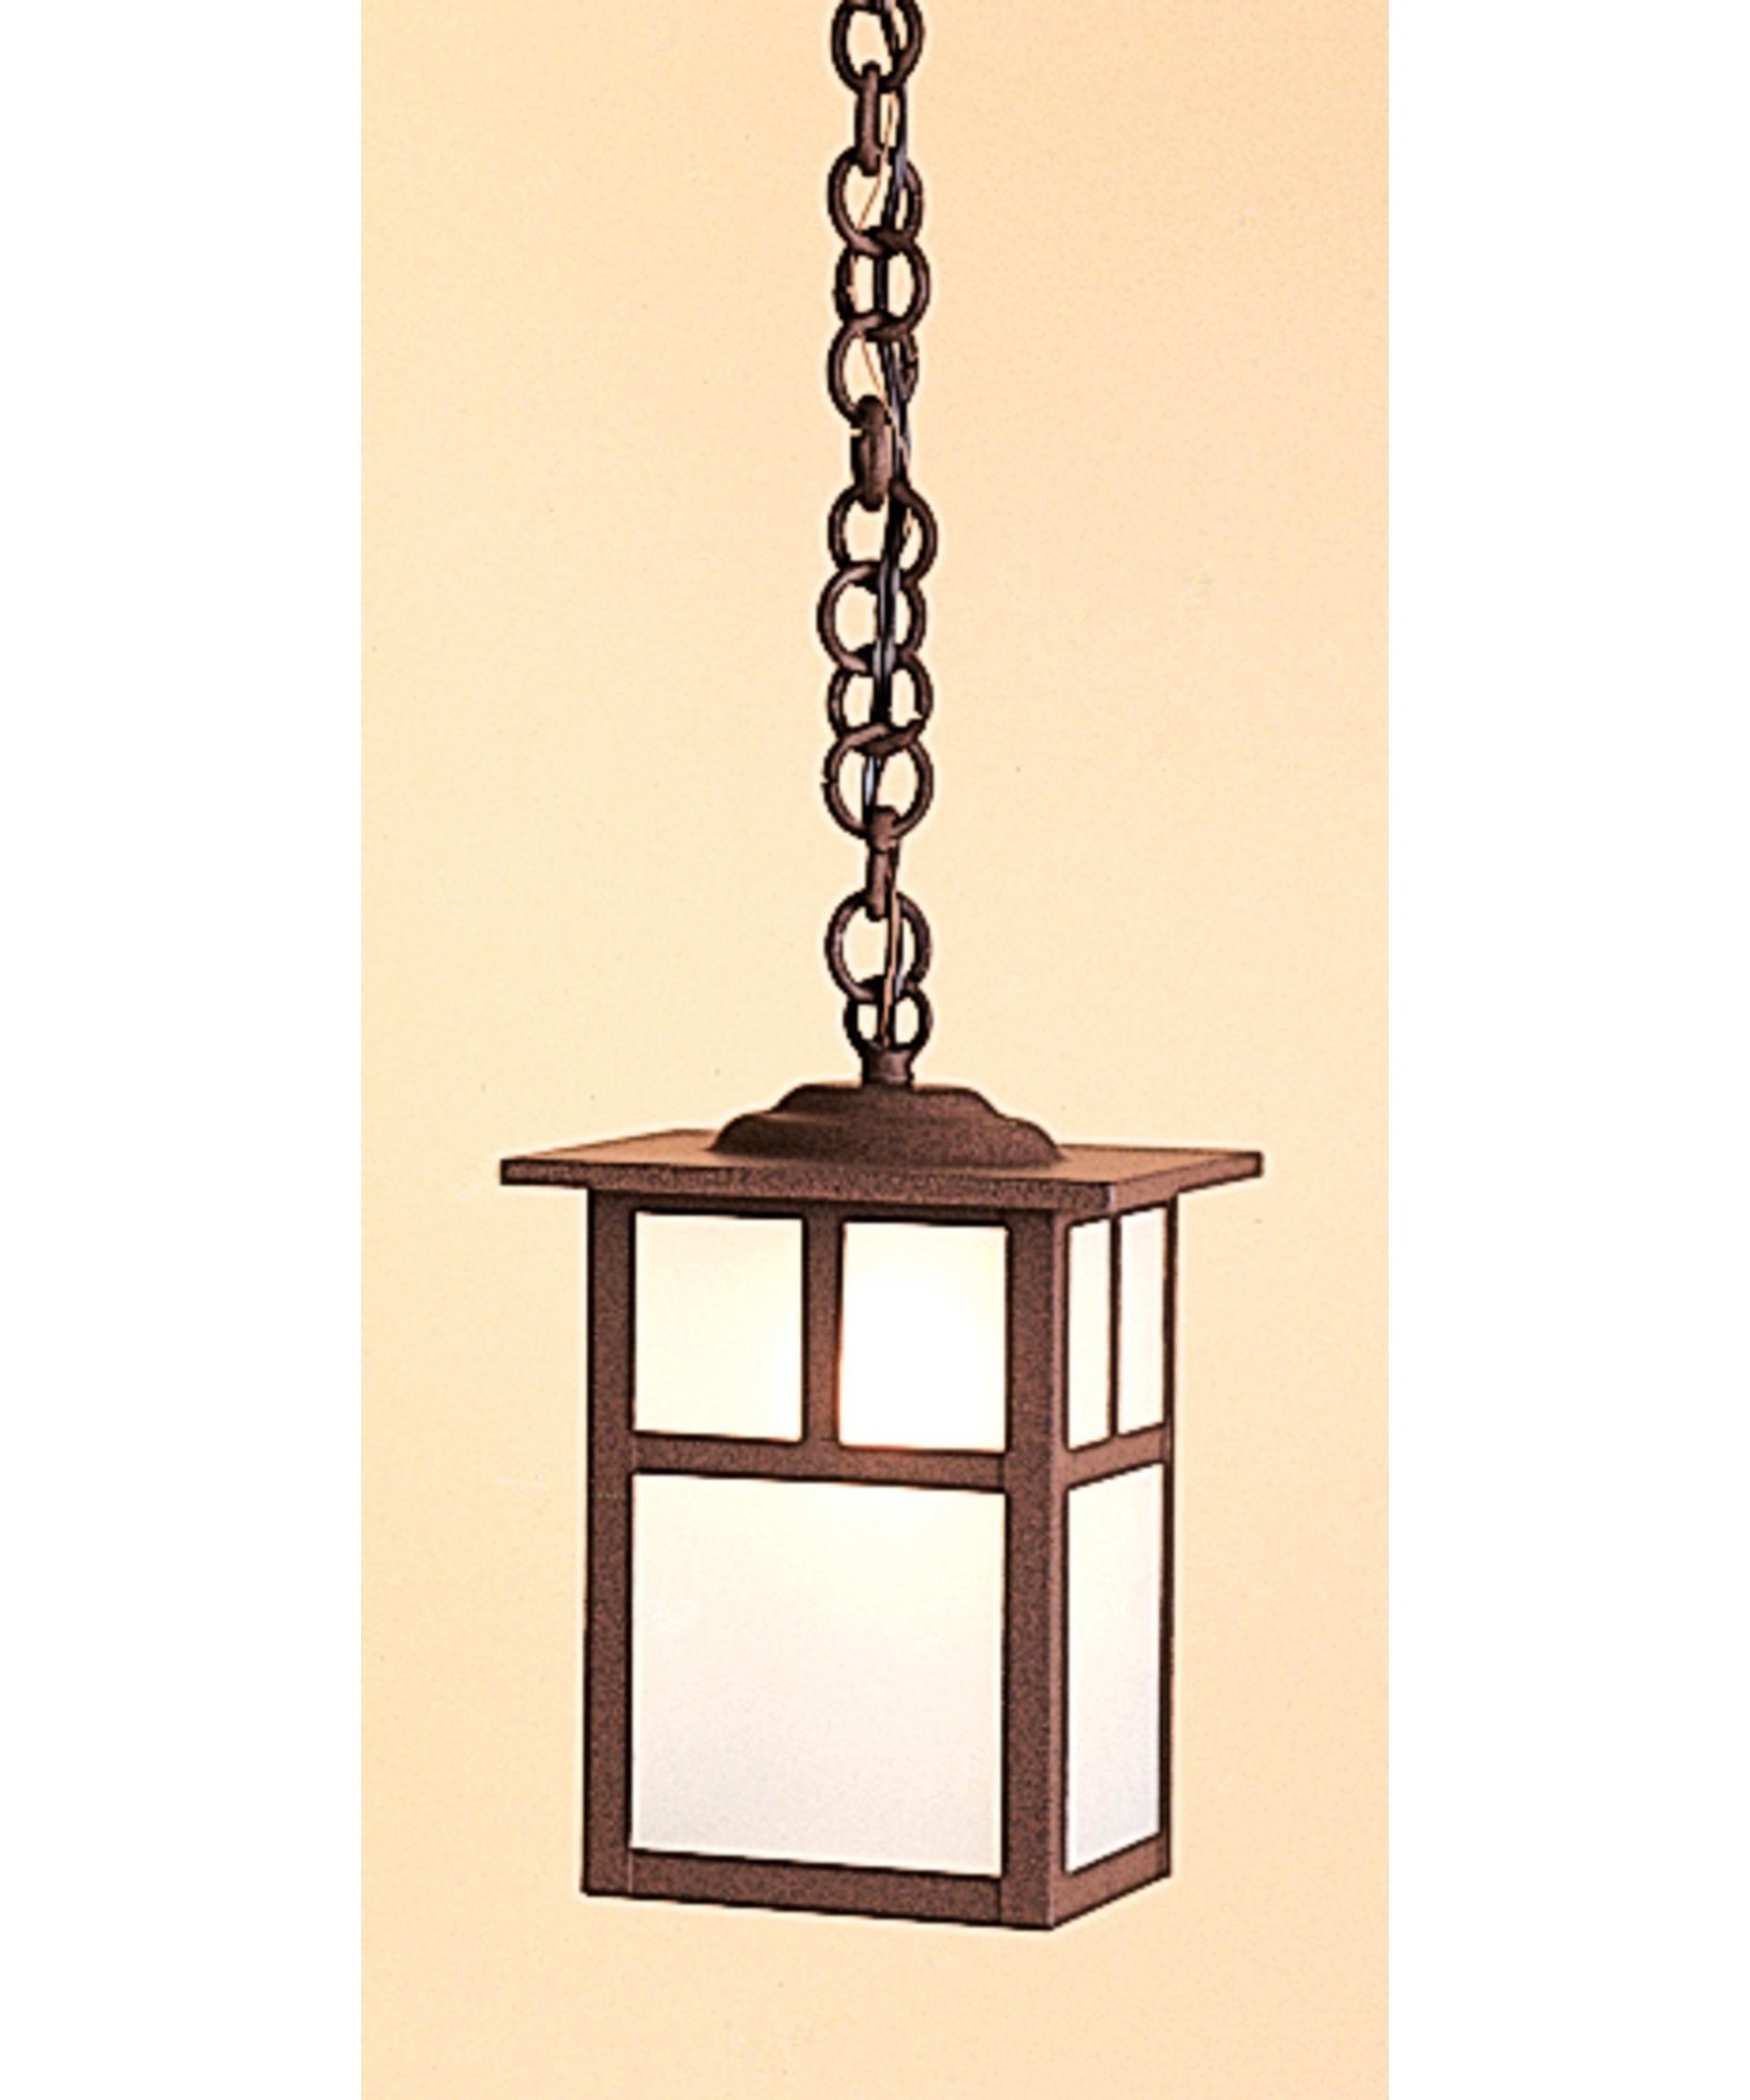 Arroyo Craftsman Mh 6 Mission 6 Inch Wide 1 Light Outdoor Hanging Throughout Most Recent Mission Style Outdoor Ceiling Lights (View 18 of 20)